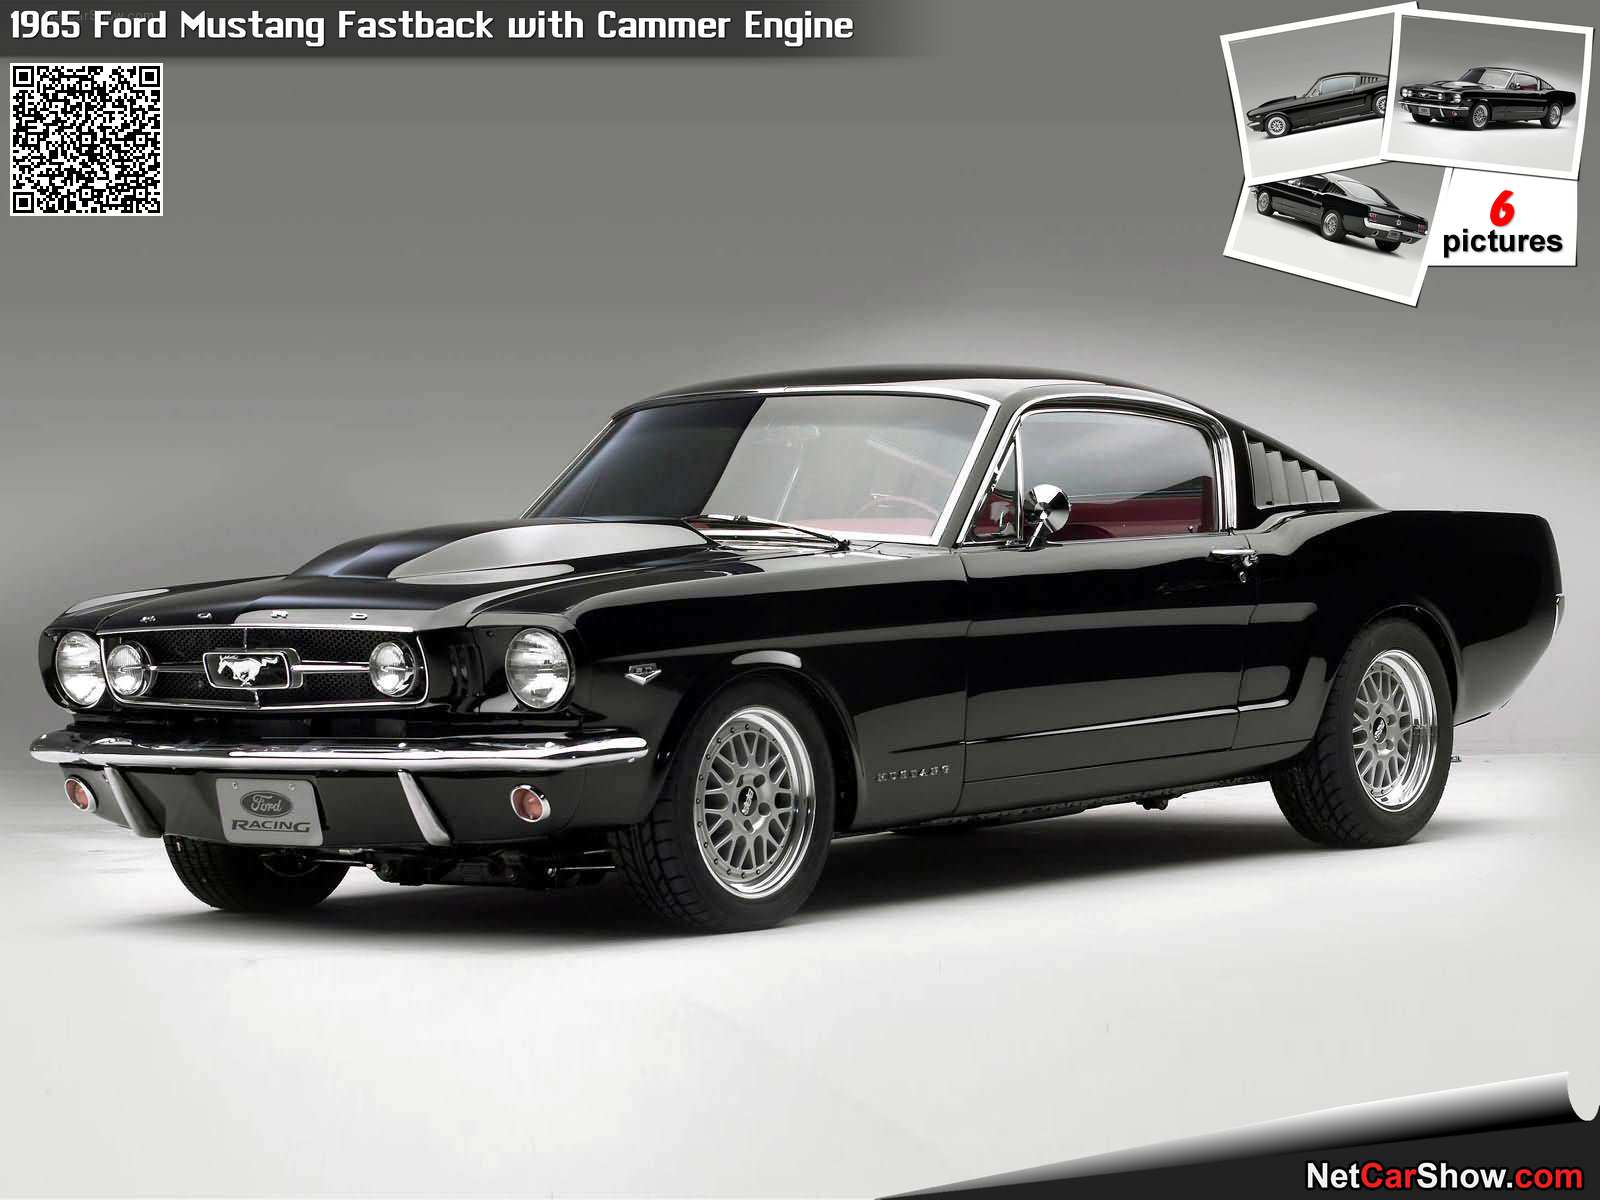 Ford-Mustang_Fastback_with_Cammer_Engine-1965-wallpaper.jpg